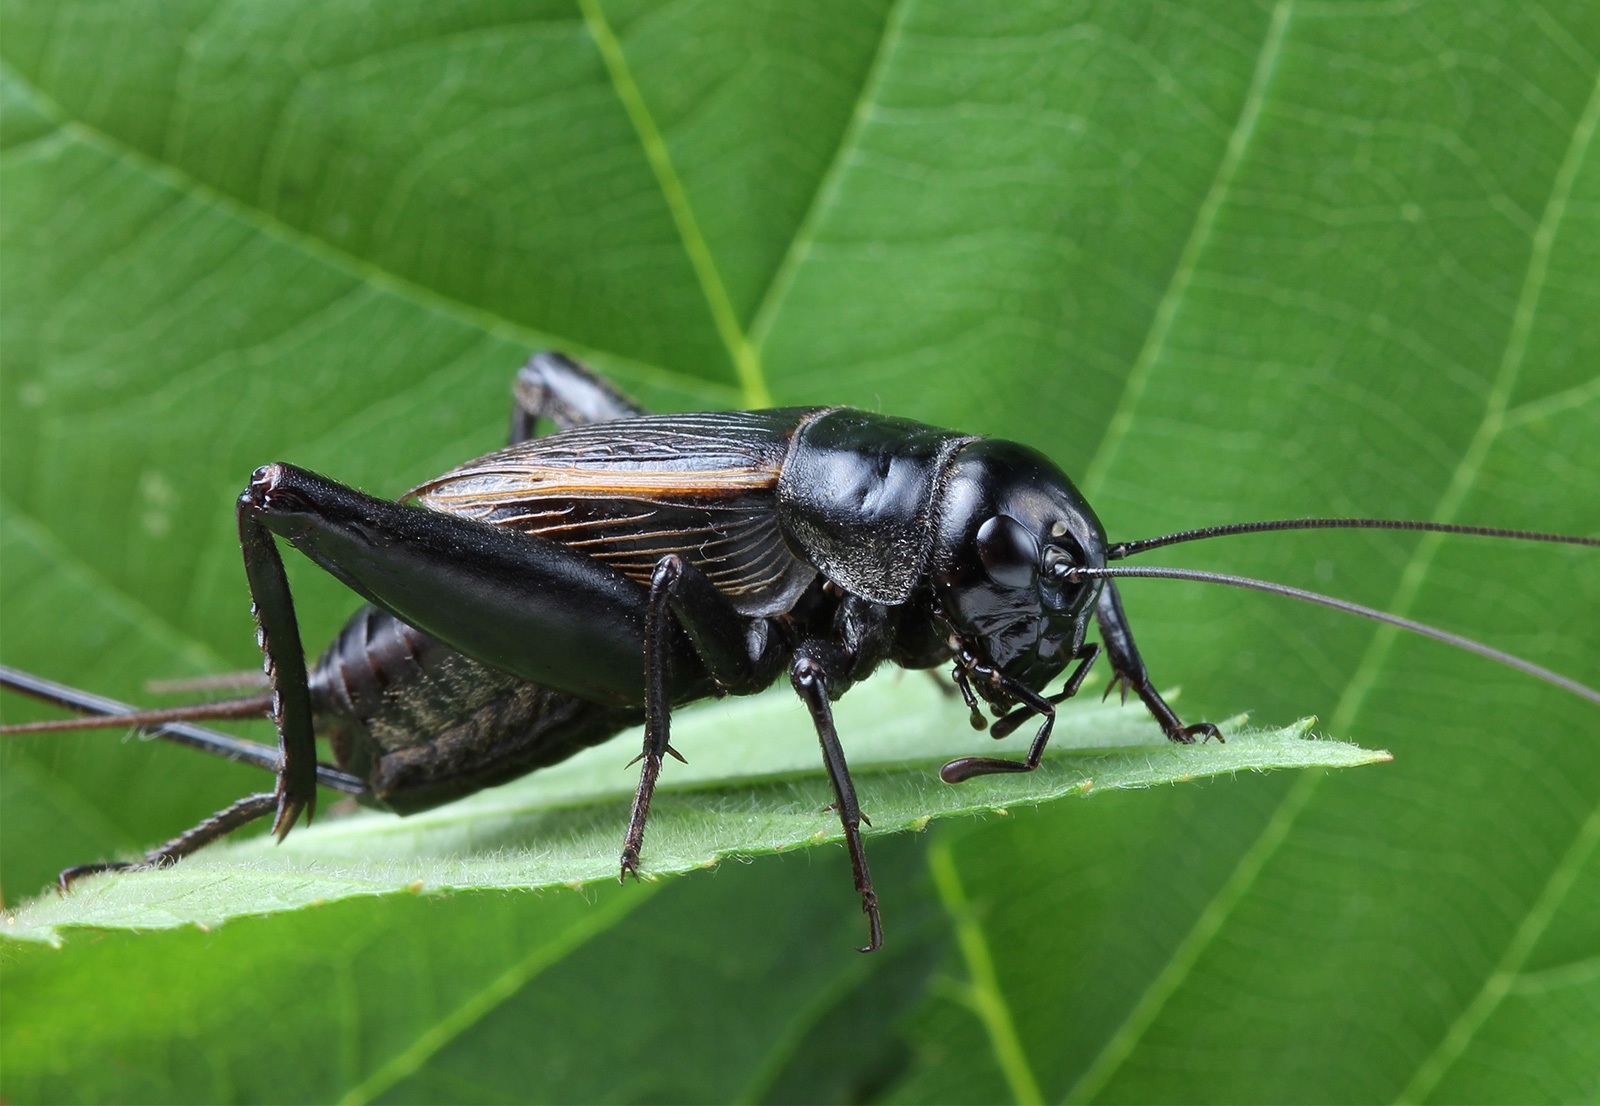 Top 7 Edible Insects that you may Startle